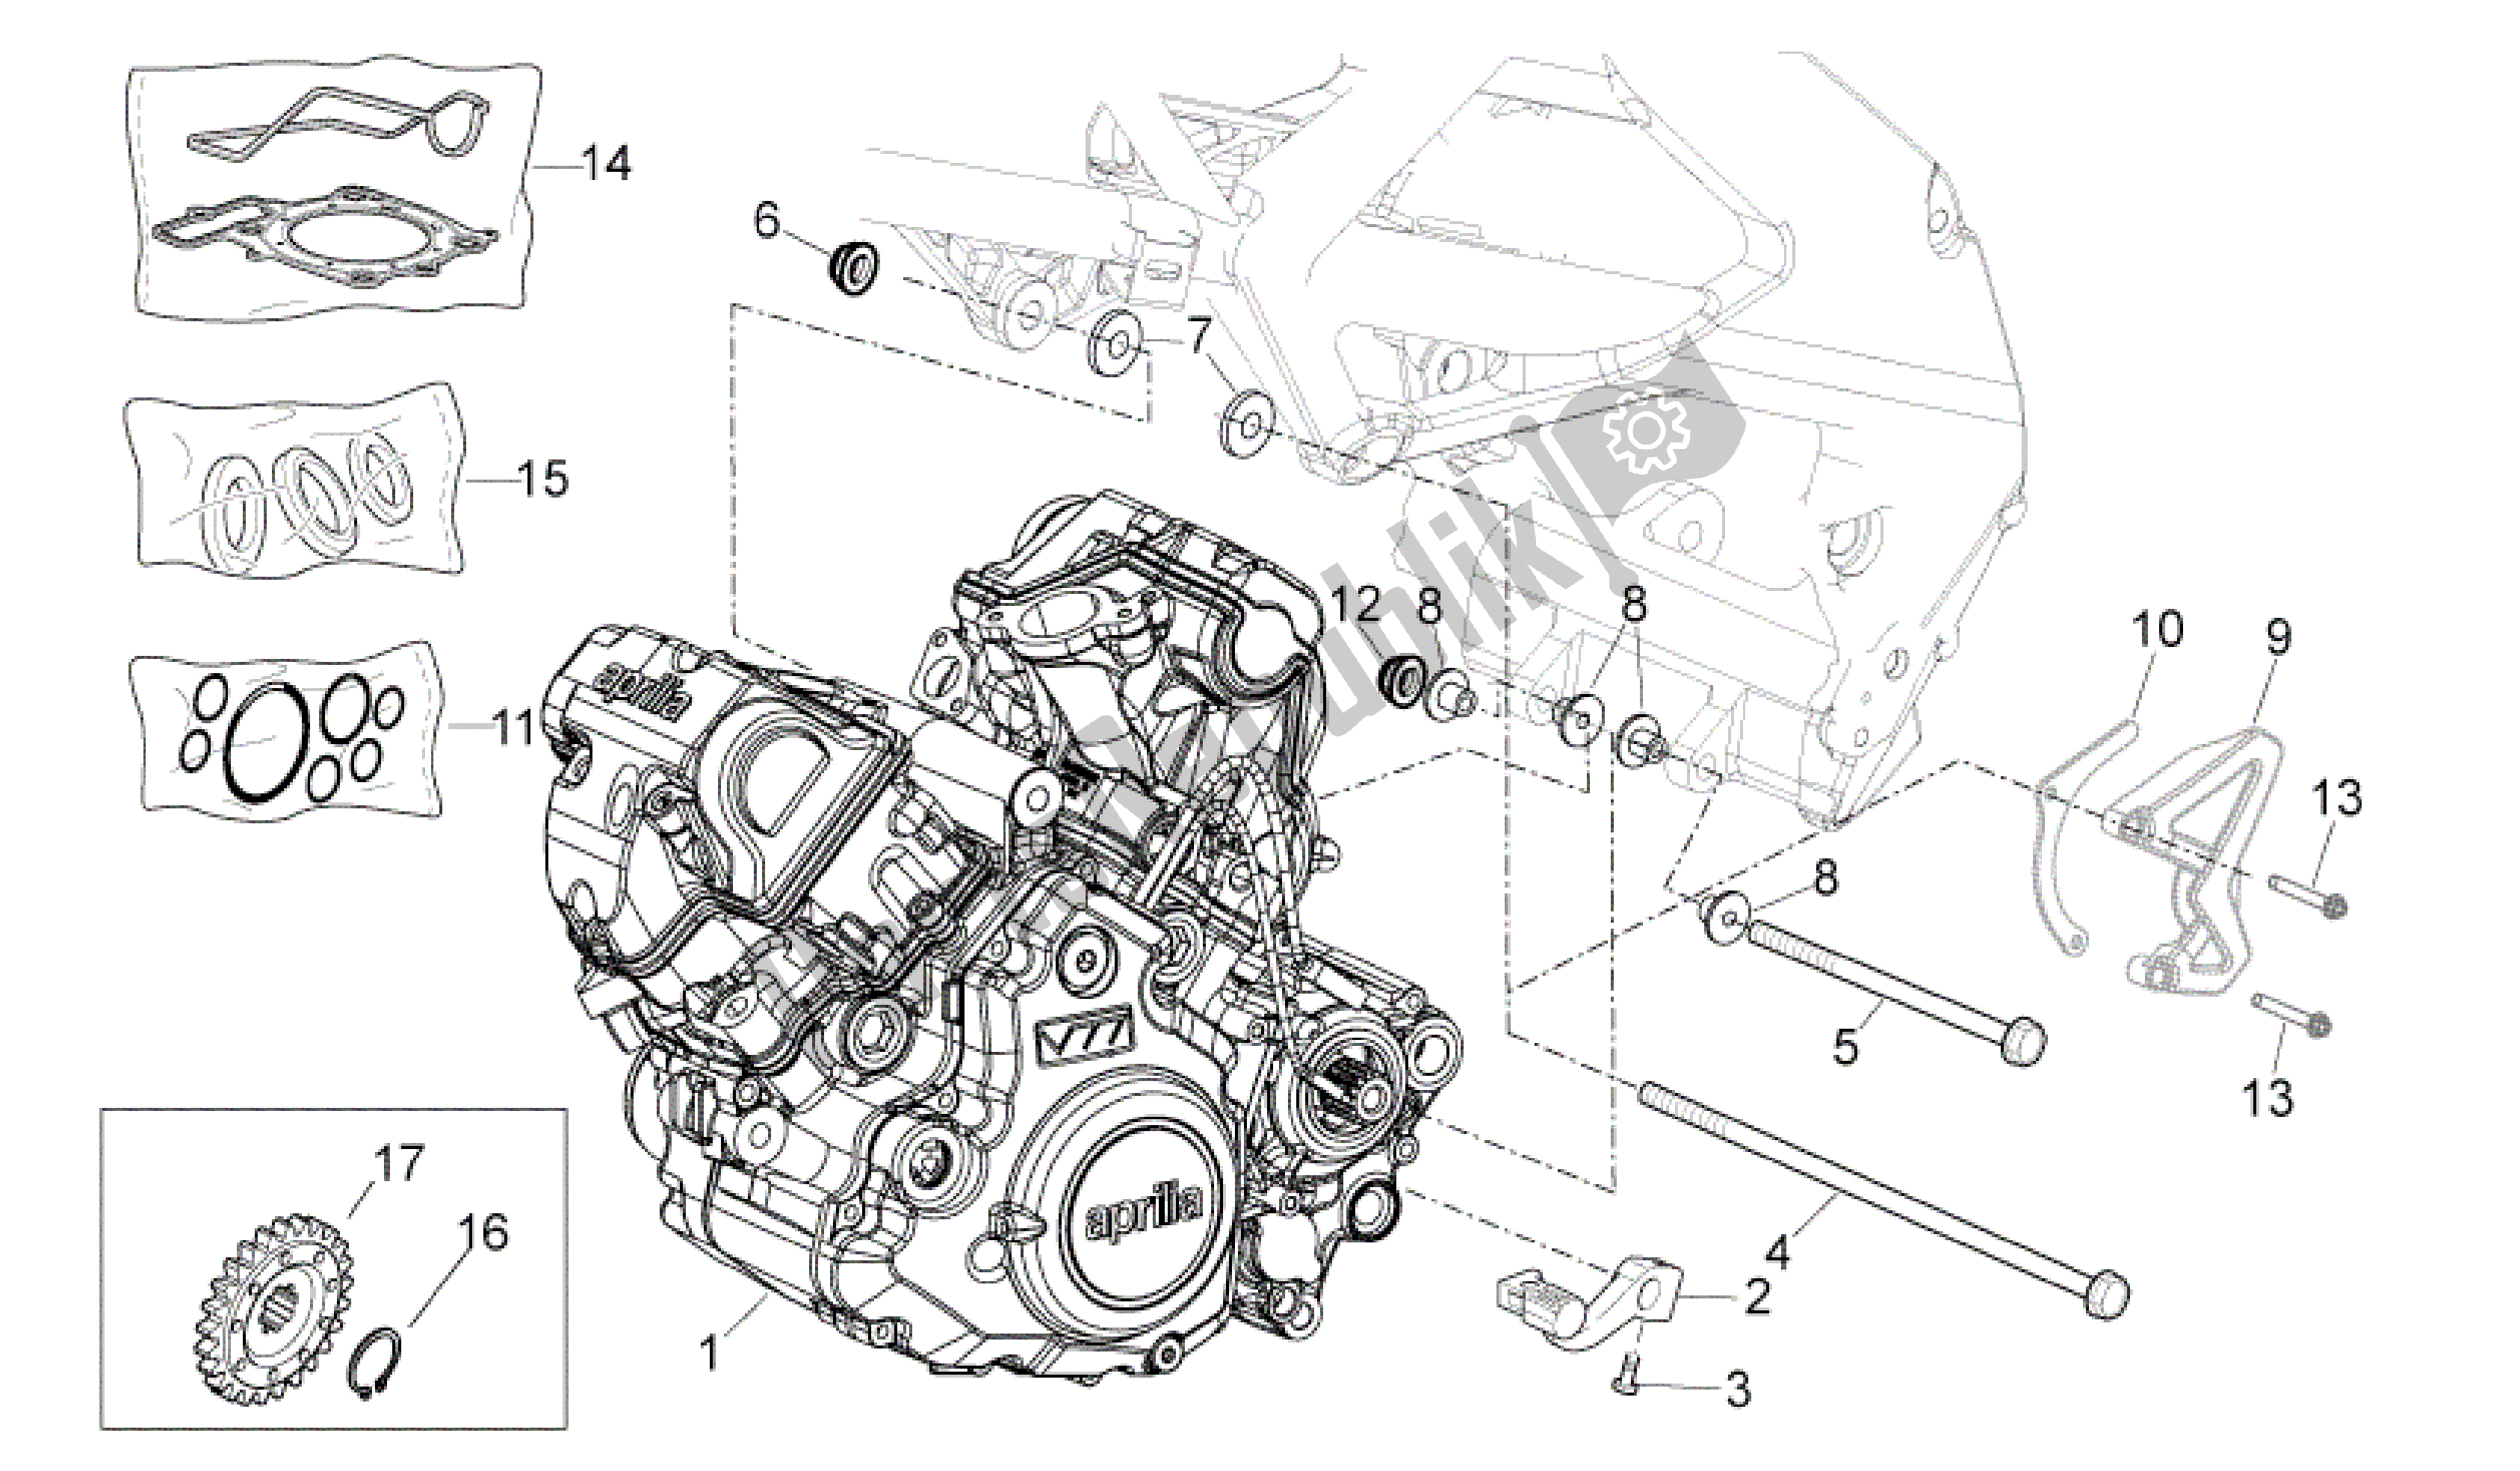 All parts for the Engine of the Aprilia MXV 450 2008 - 2010